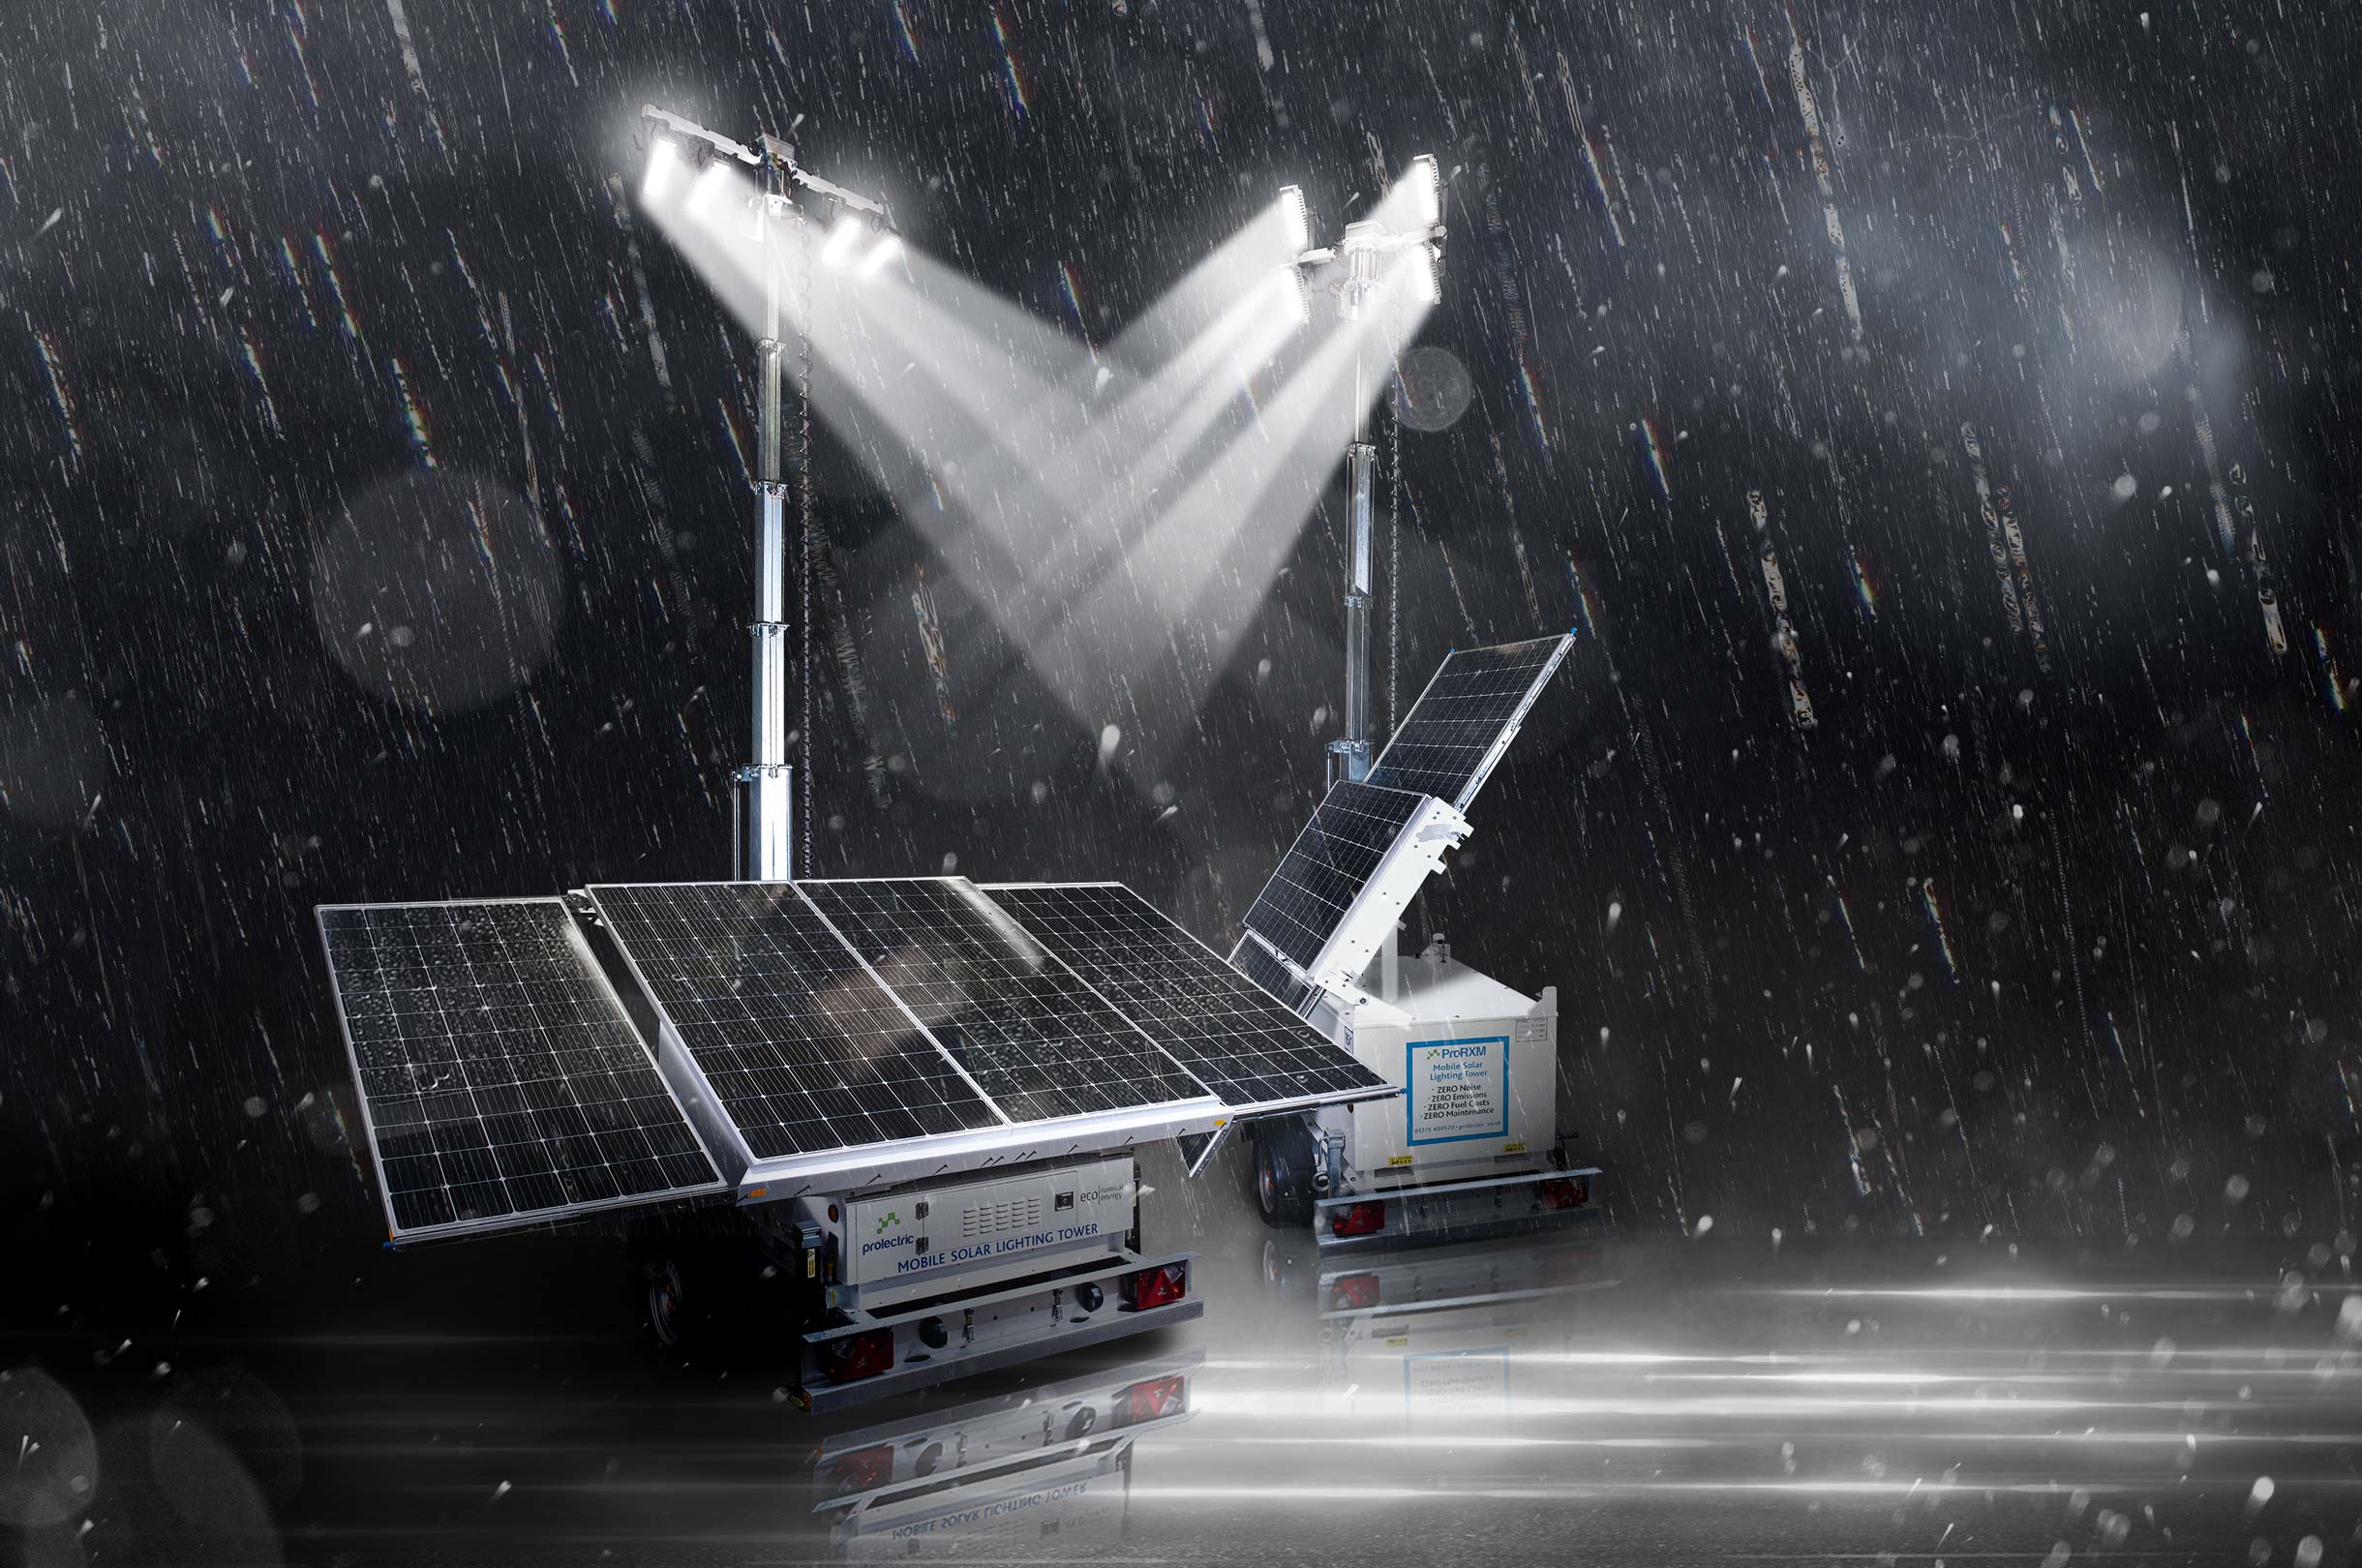 Prolectric Solar Lights rendered in Photoshop to include bad weather